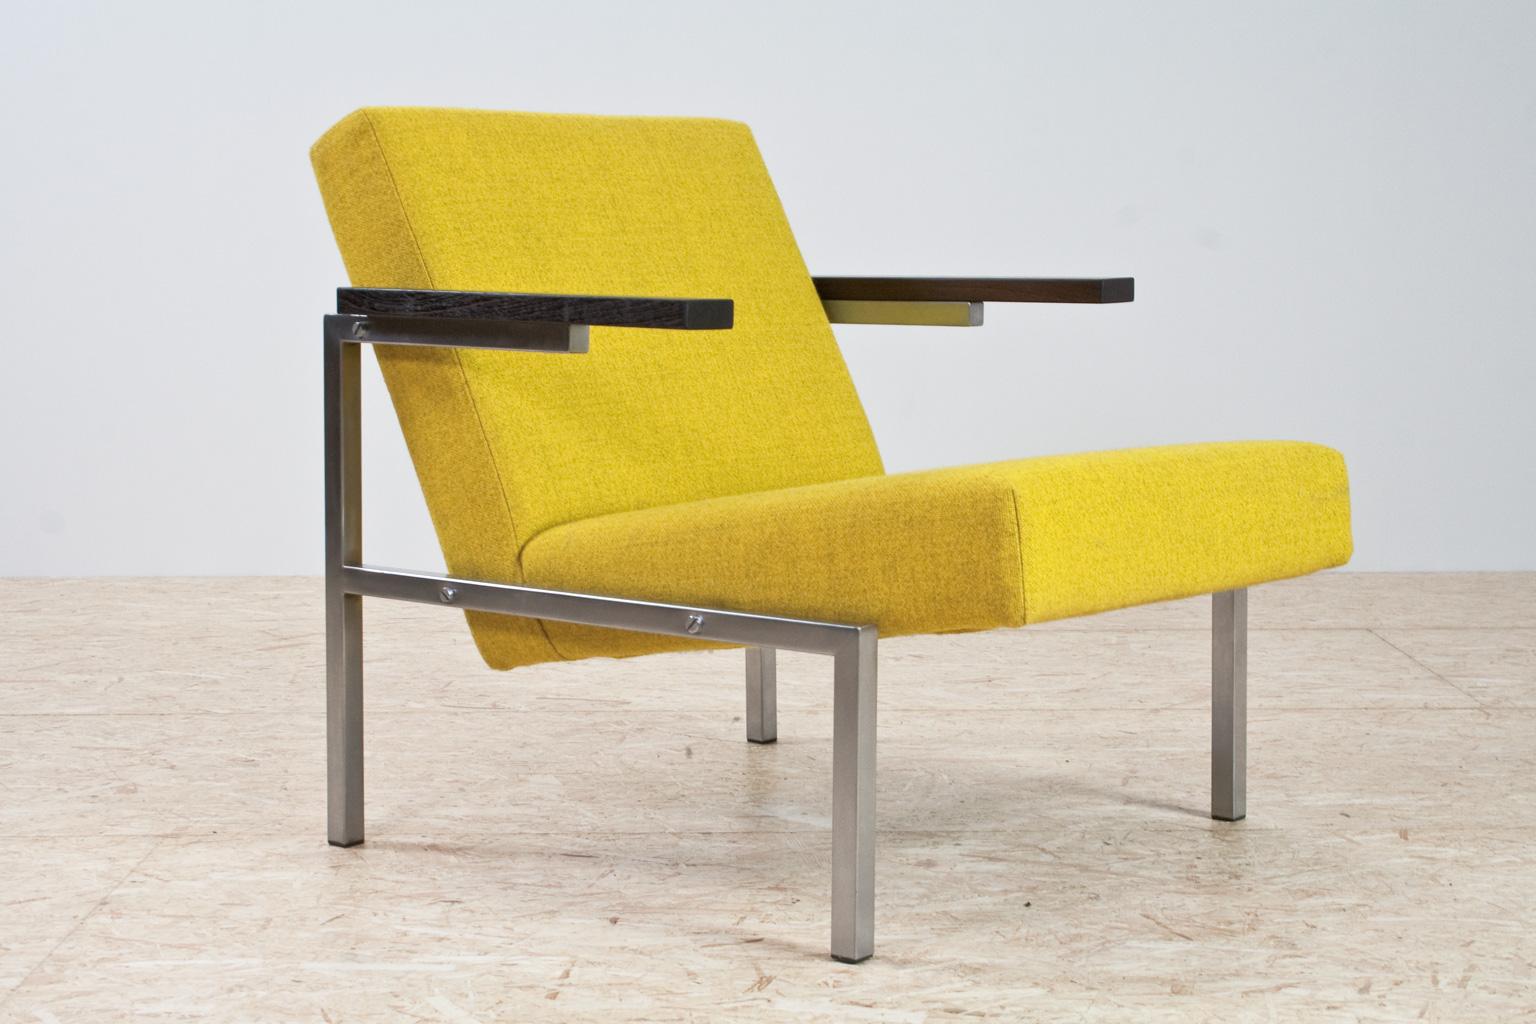 Mid Century Modern armchair by modernist Dutch Designer Martin Visser for Spectrum collection 1960-1965. Original chromed metal frame and massive wenge armrests, re-upholstered in an excellent wool yellow furniture fabric (Ploegwool no.66). Although